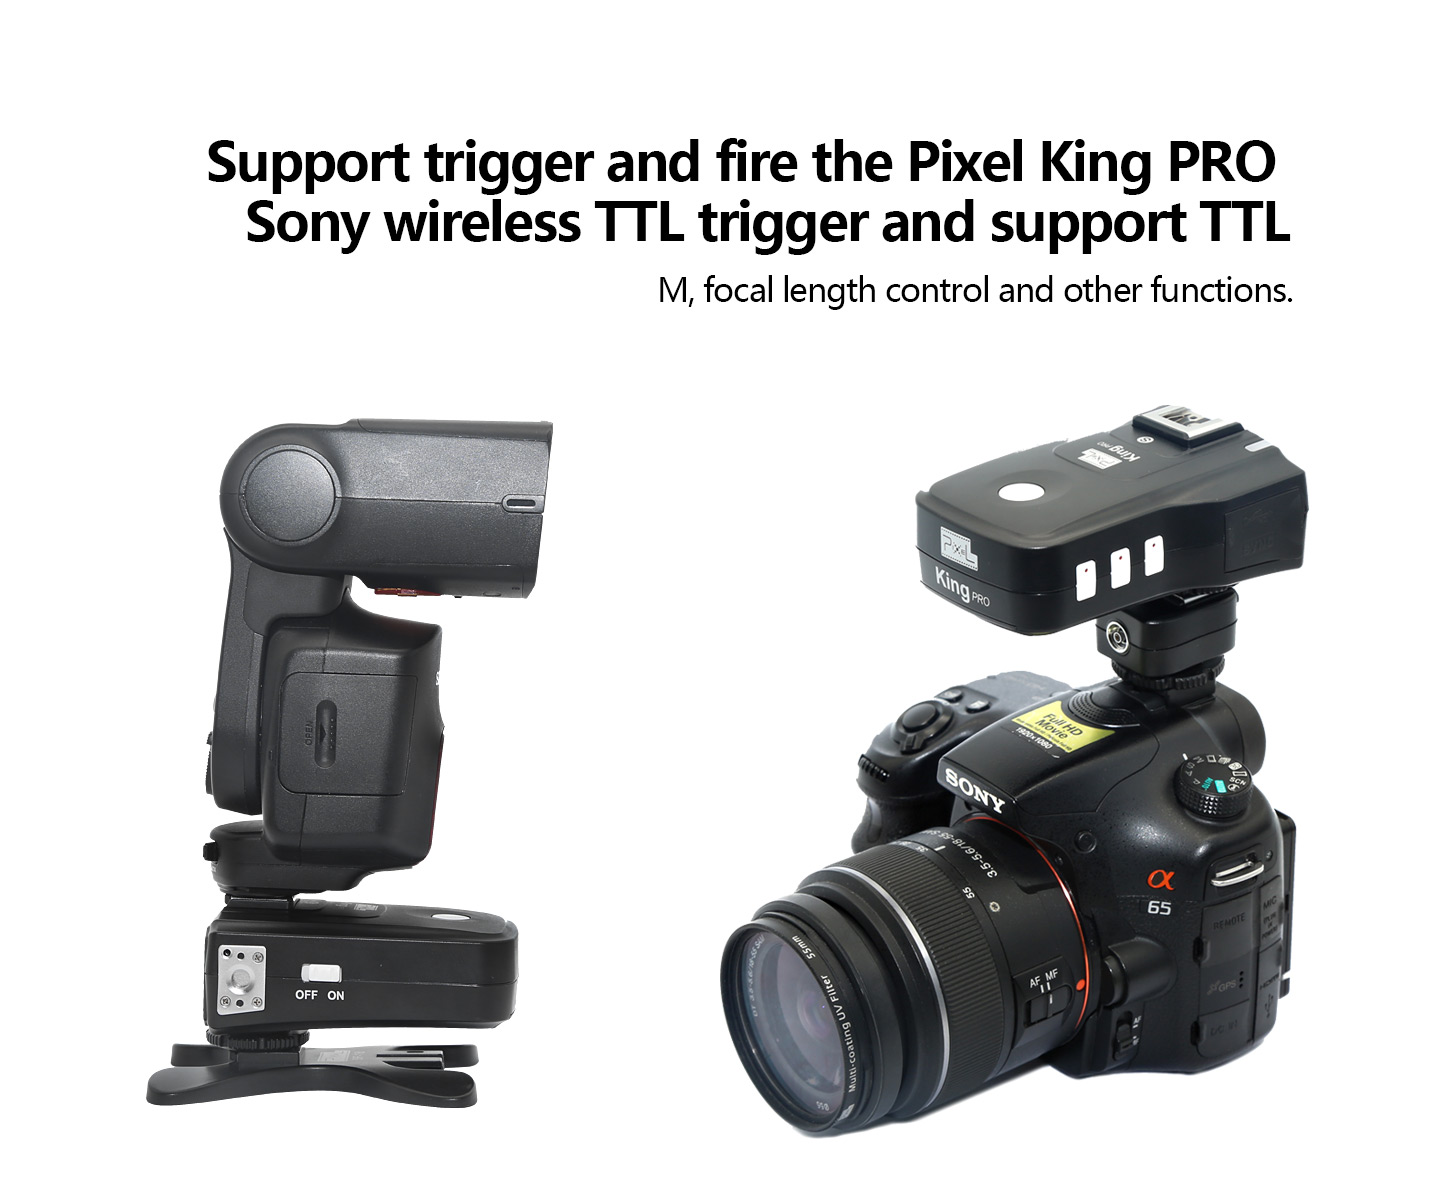 Support trigger and fire the Pixel King PRO